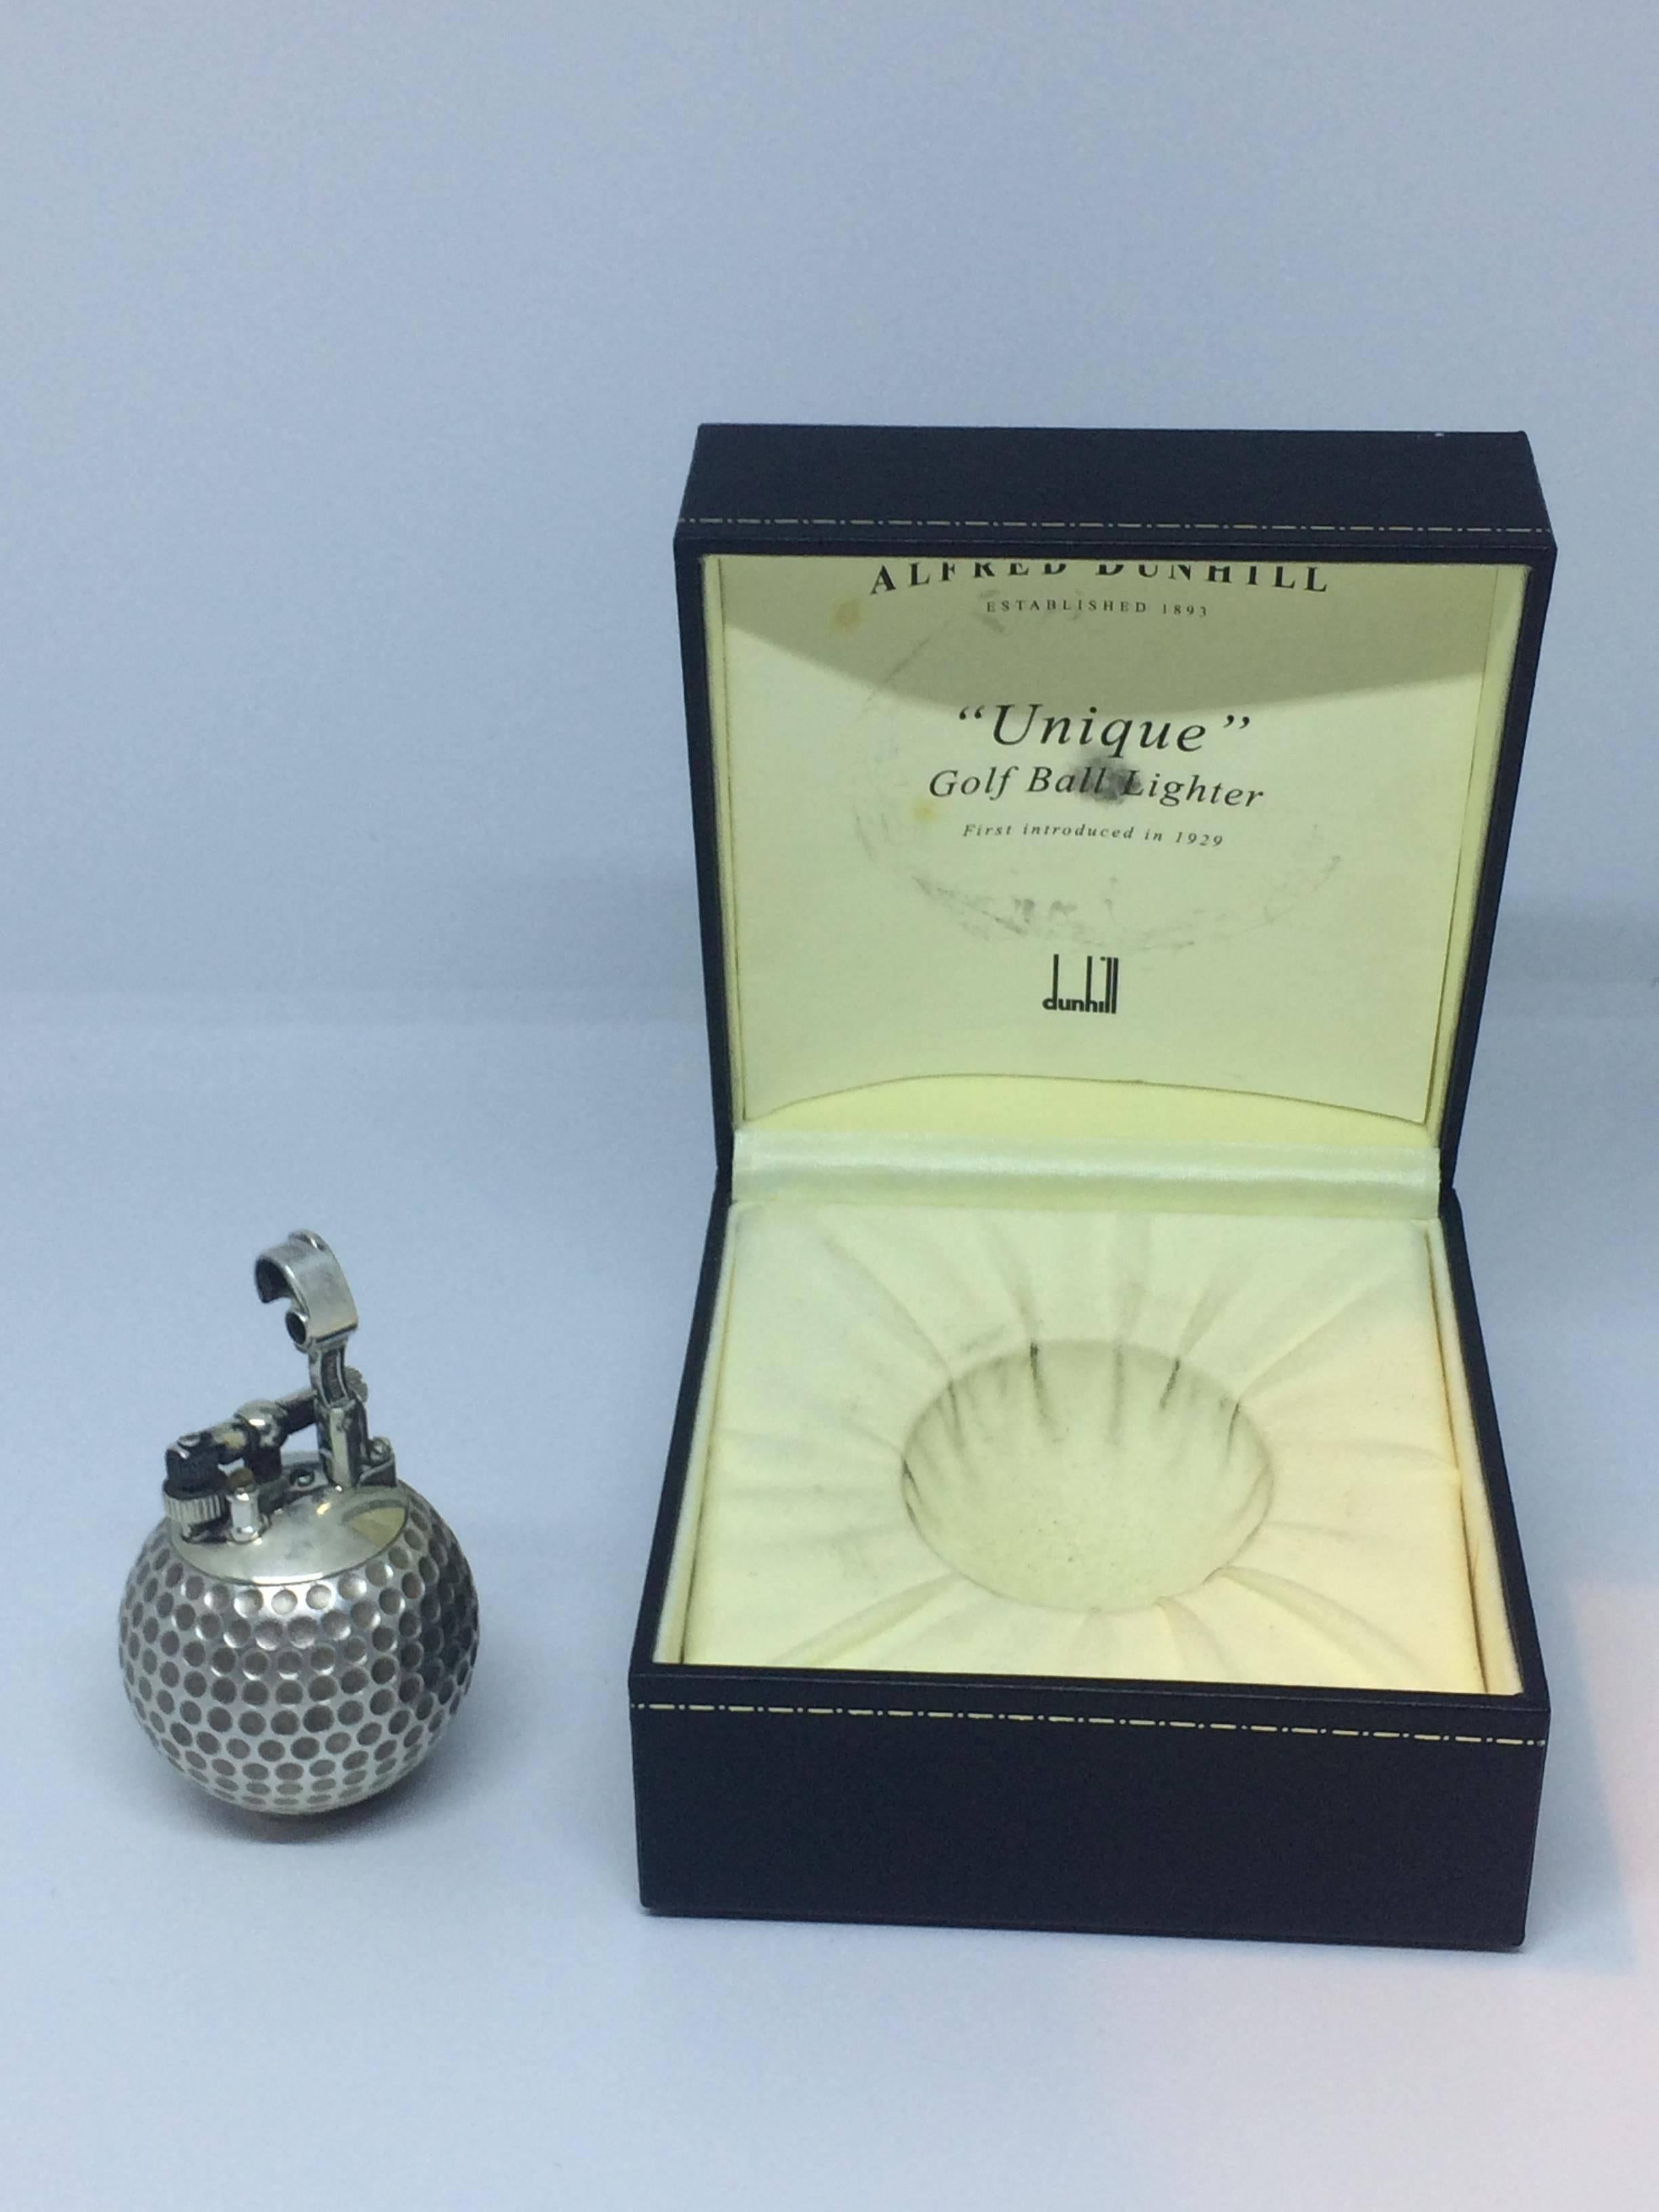 This is a handcrafted sterling silver table lighter in the form of a golf ball by a company named Dunhill. This Classic petrol lighter, with the curved arm was introduced by Dunhill in 1929 and remained a strong part of their collection until the